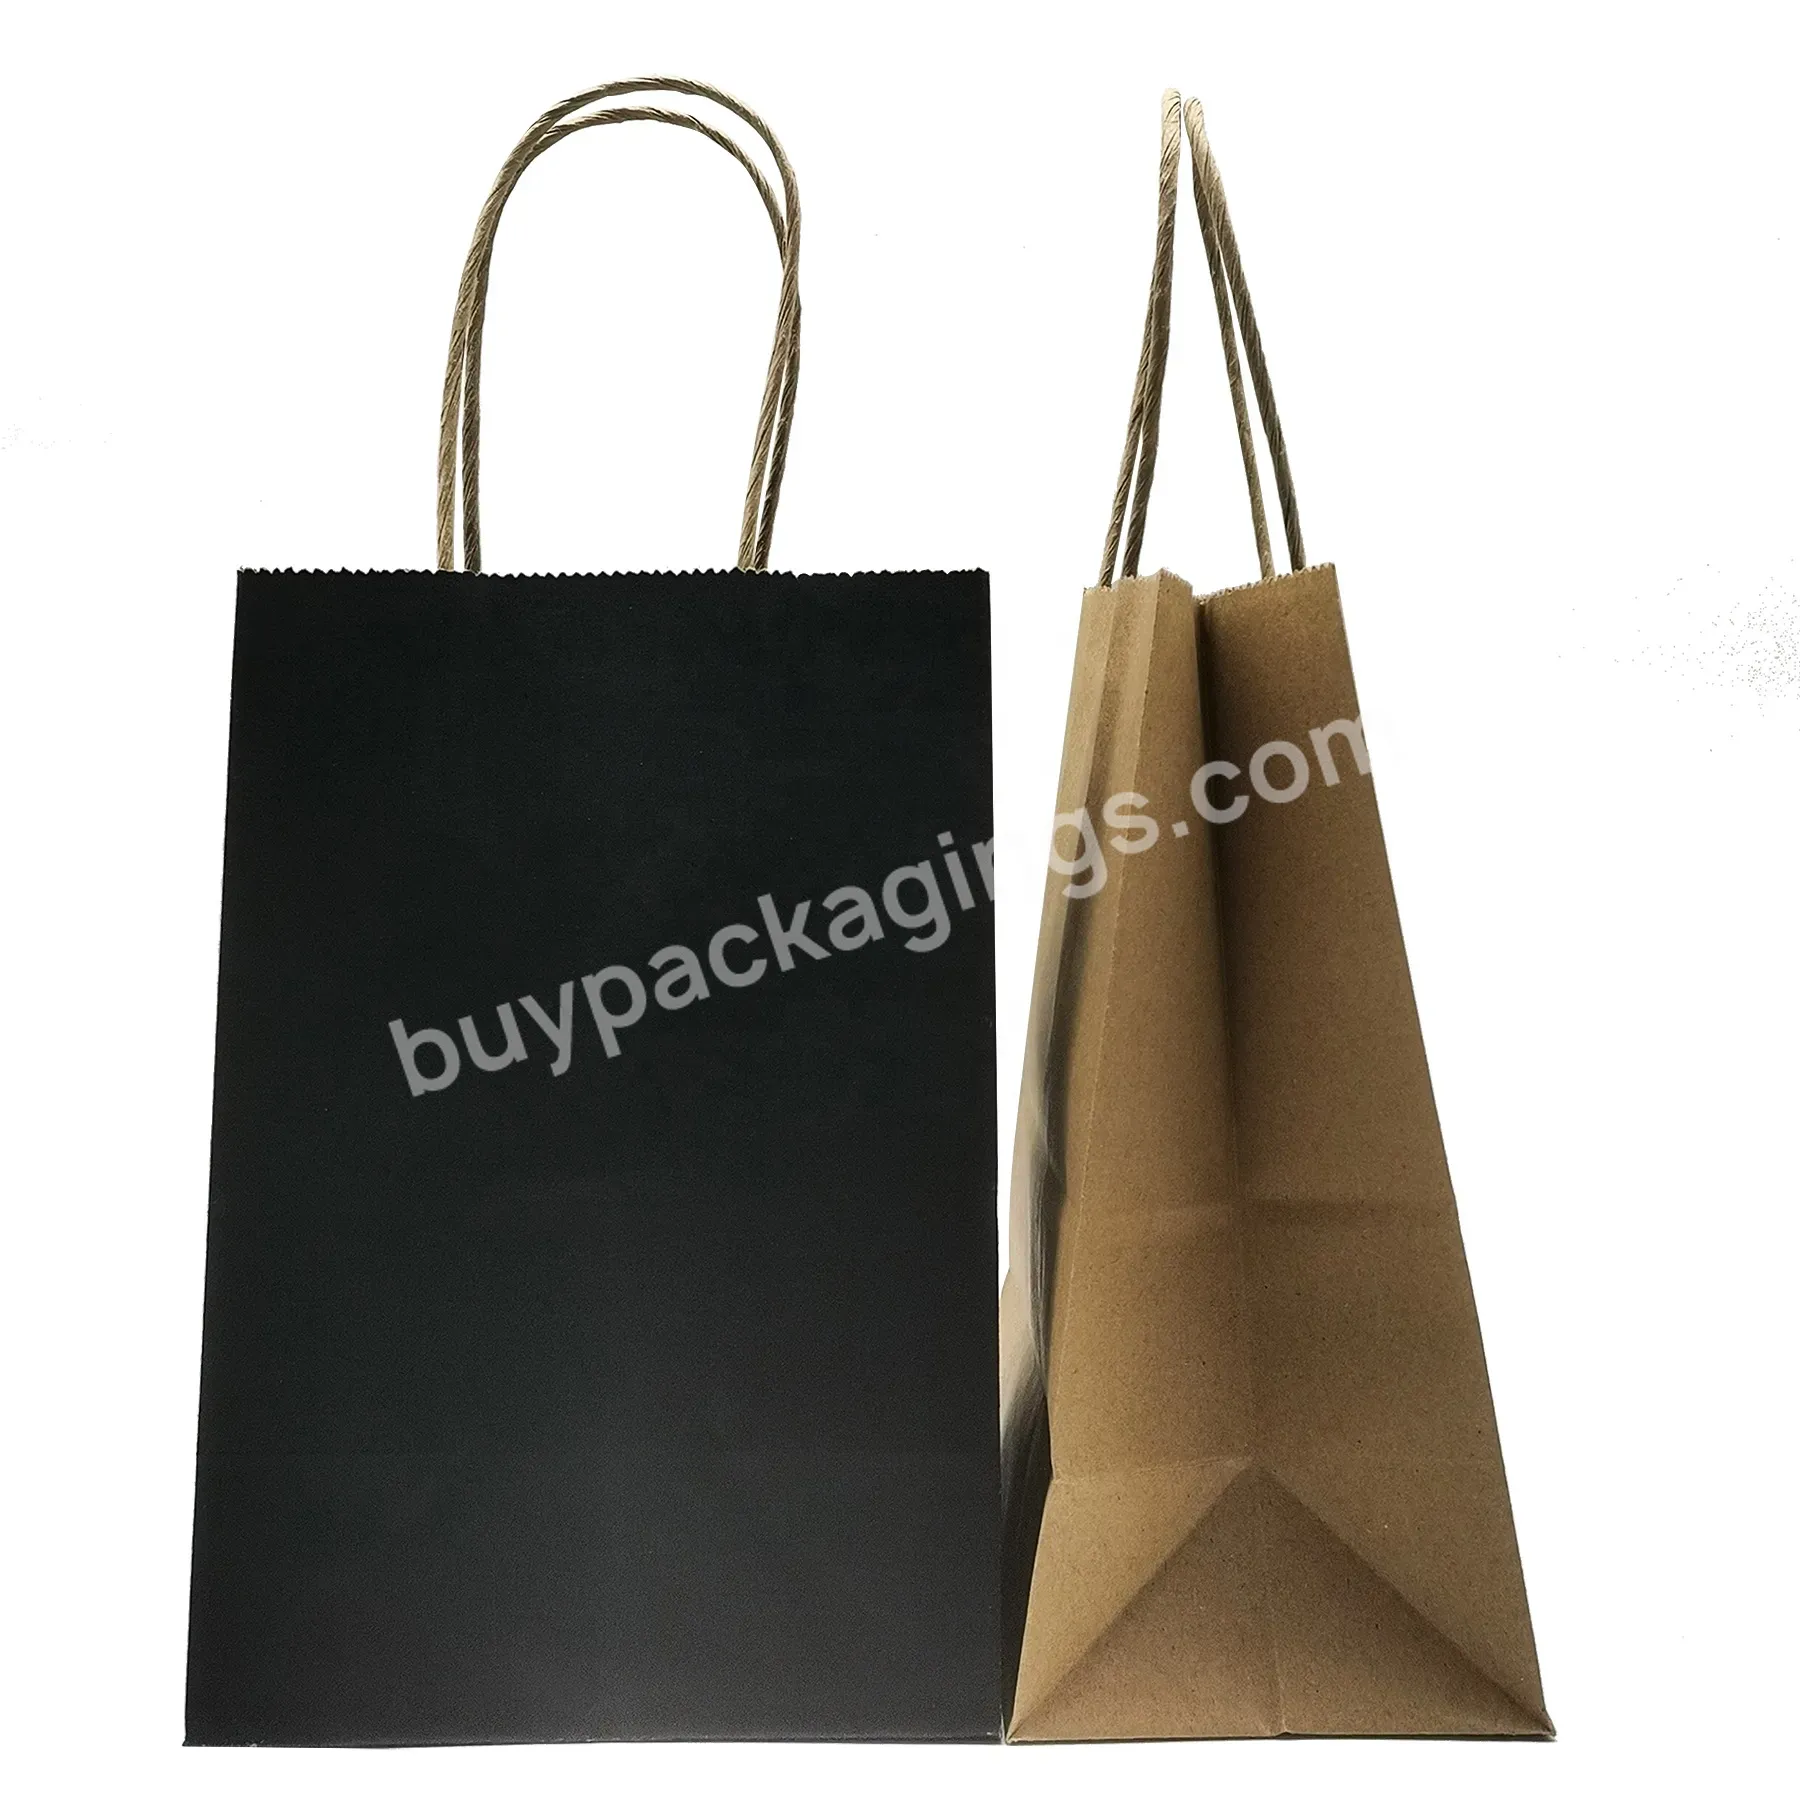 Small Kraft Shopping Bags Kraft Paper Packing Bag Paper Bag With Handles Craft Gift Totes In Bulk For Boutiques,Small Business